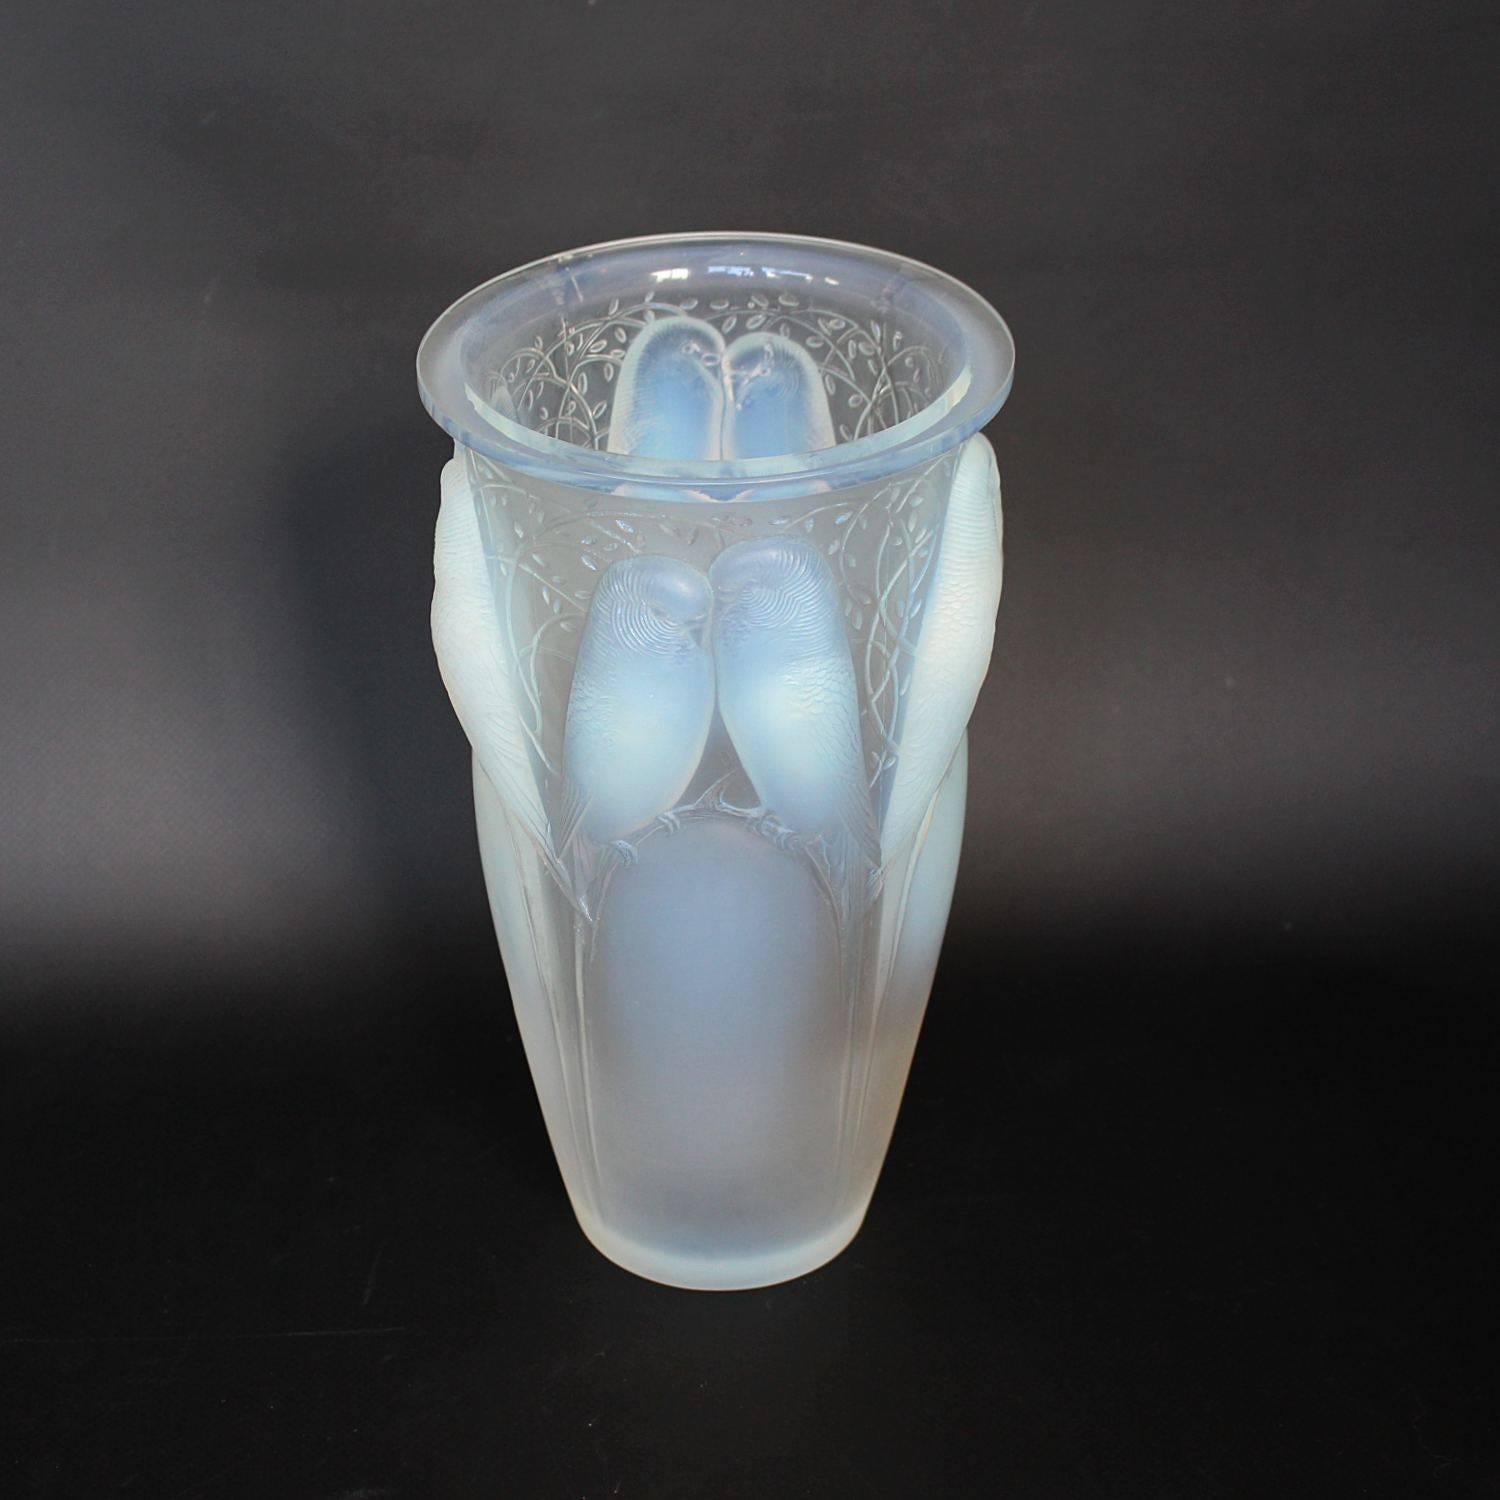 Ceylan, an Art Deco glass vase. A frosted and opalescent glass vase, relief decorated with pairs of lovebirds and vines.

Etched R Lalique France to underside.

Marcilhac, R Lalique Catalogue Raisonné de L’Œuvre de Verre p.418, Model number